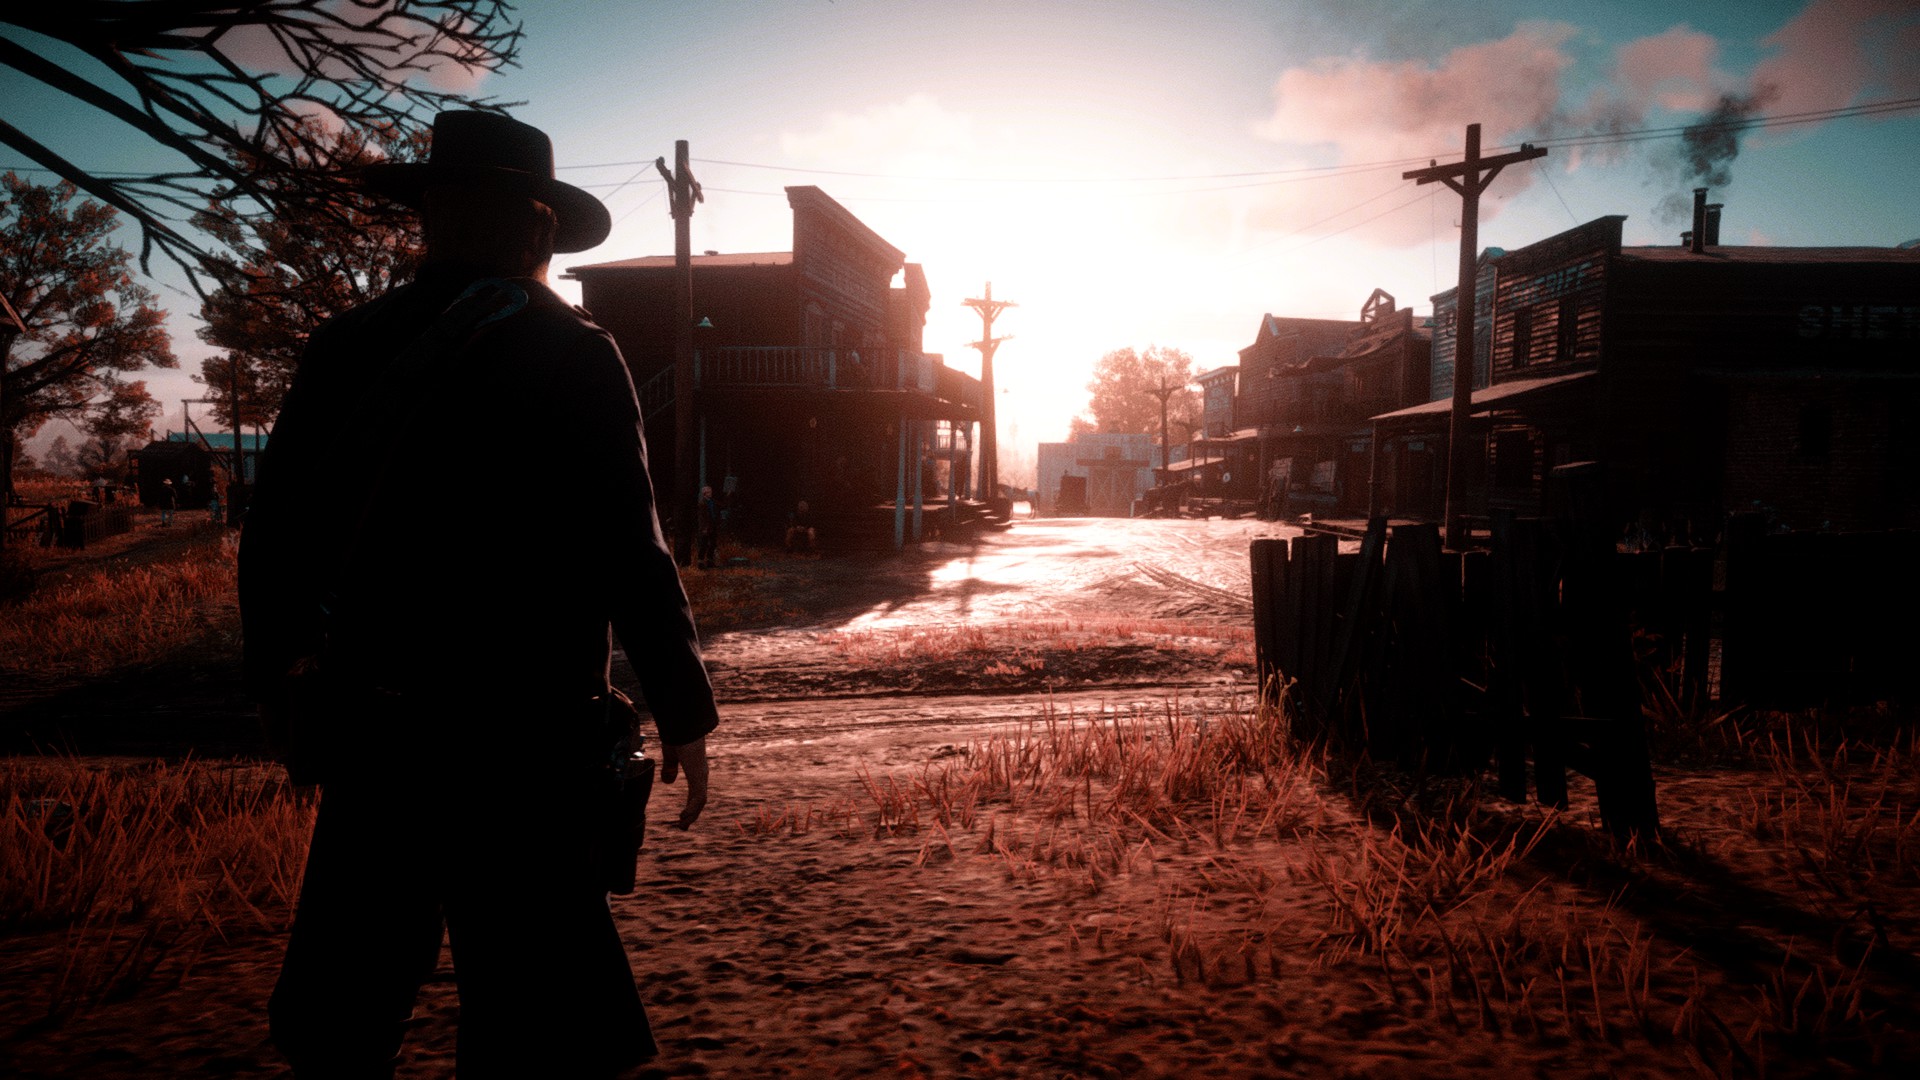 General 1920x1080 Red Dead Redemption 2 video game art silhouette digital art video games screen shot village video game characters CGI sky clouds sunlight cowboys cowboy hats hat men with hats power lines smoke trees standing looking away